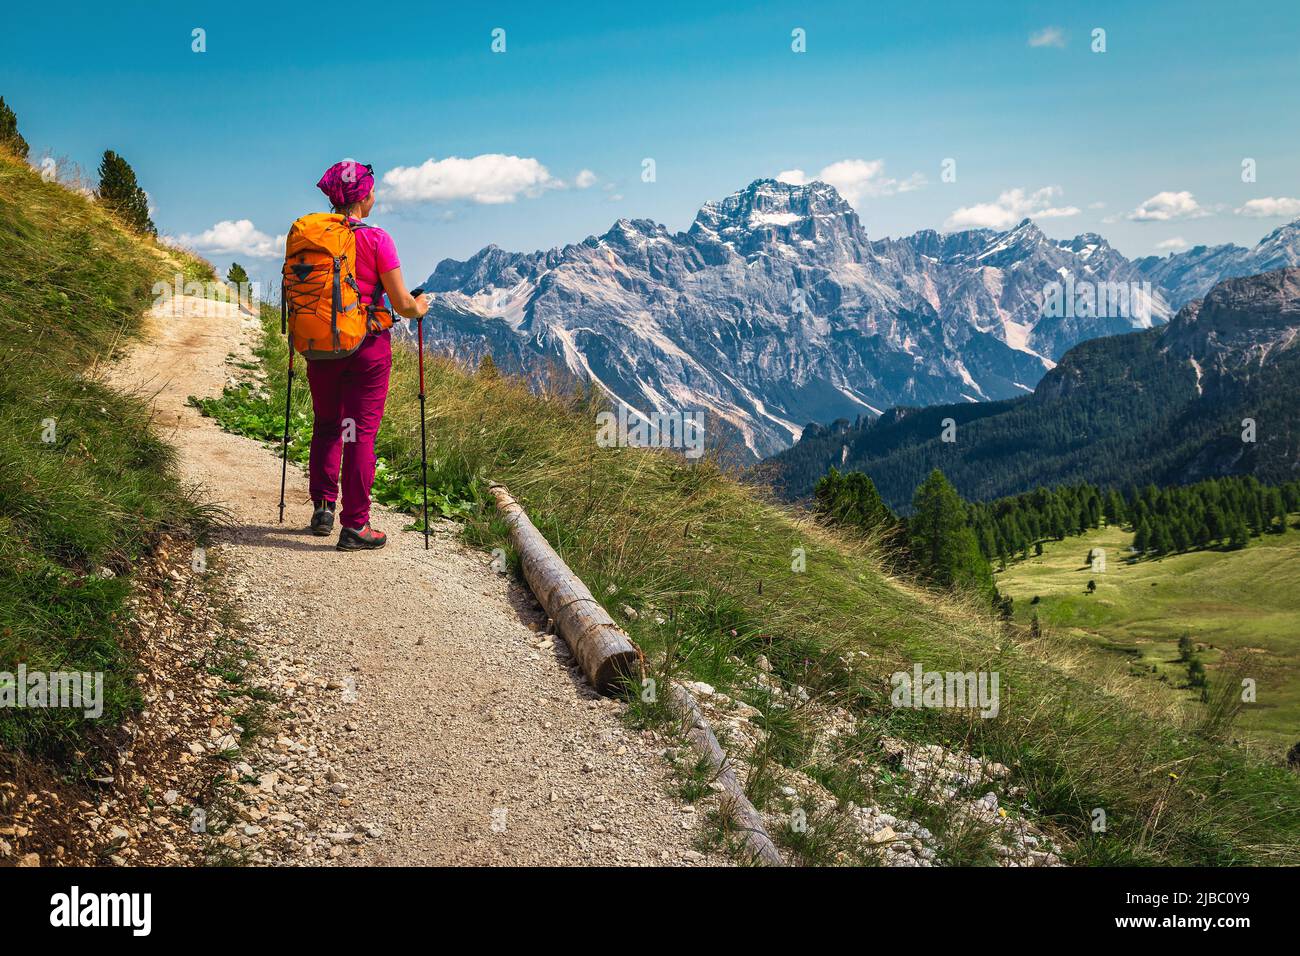 Sporty active woman hiker with colorful backpack and mountain equipment enjoying the view from the alpine trail, Dolomites, Italy, Europe Stock Photo